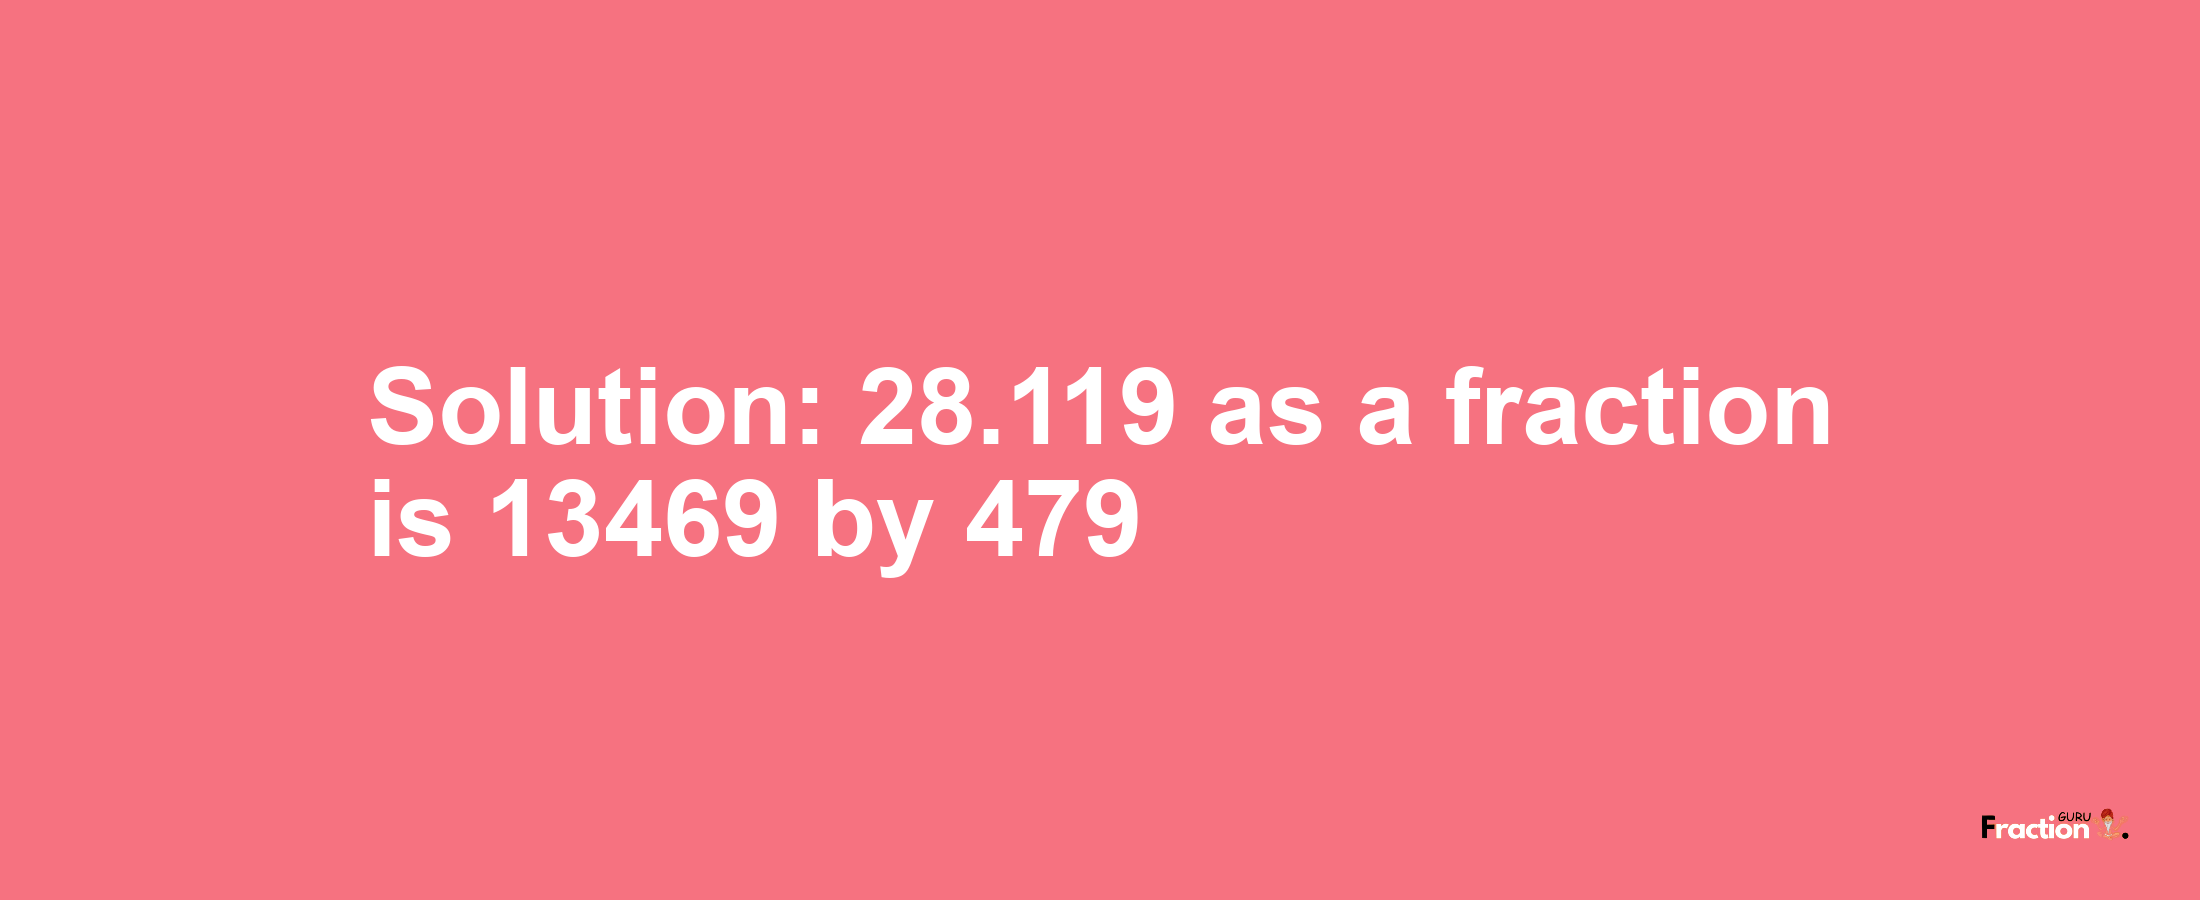 Solution:28.119 as a fraction is 13469/479